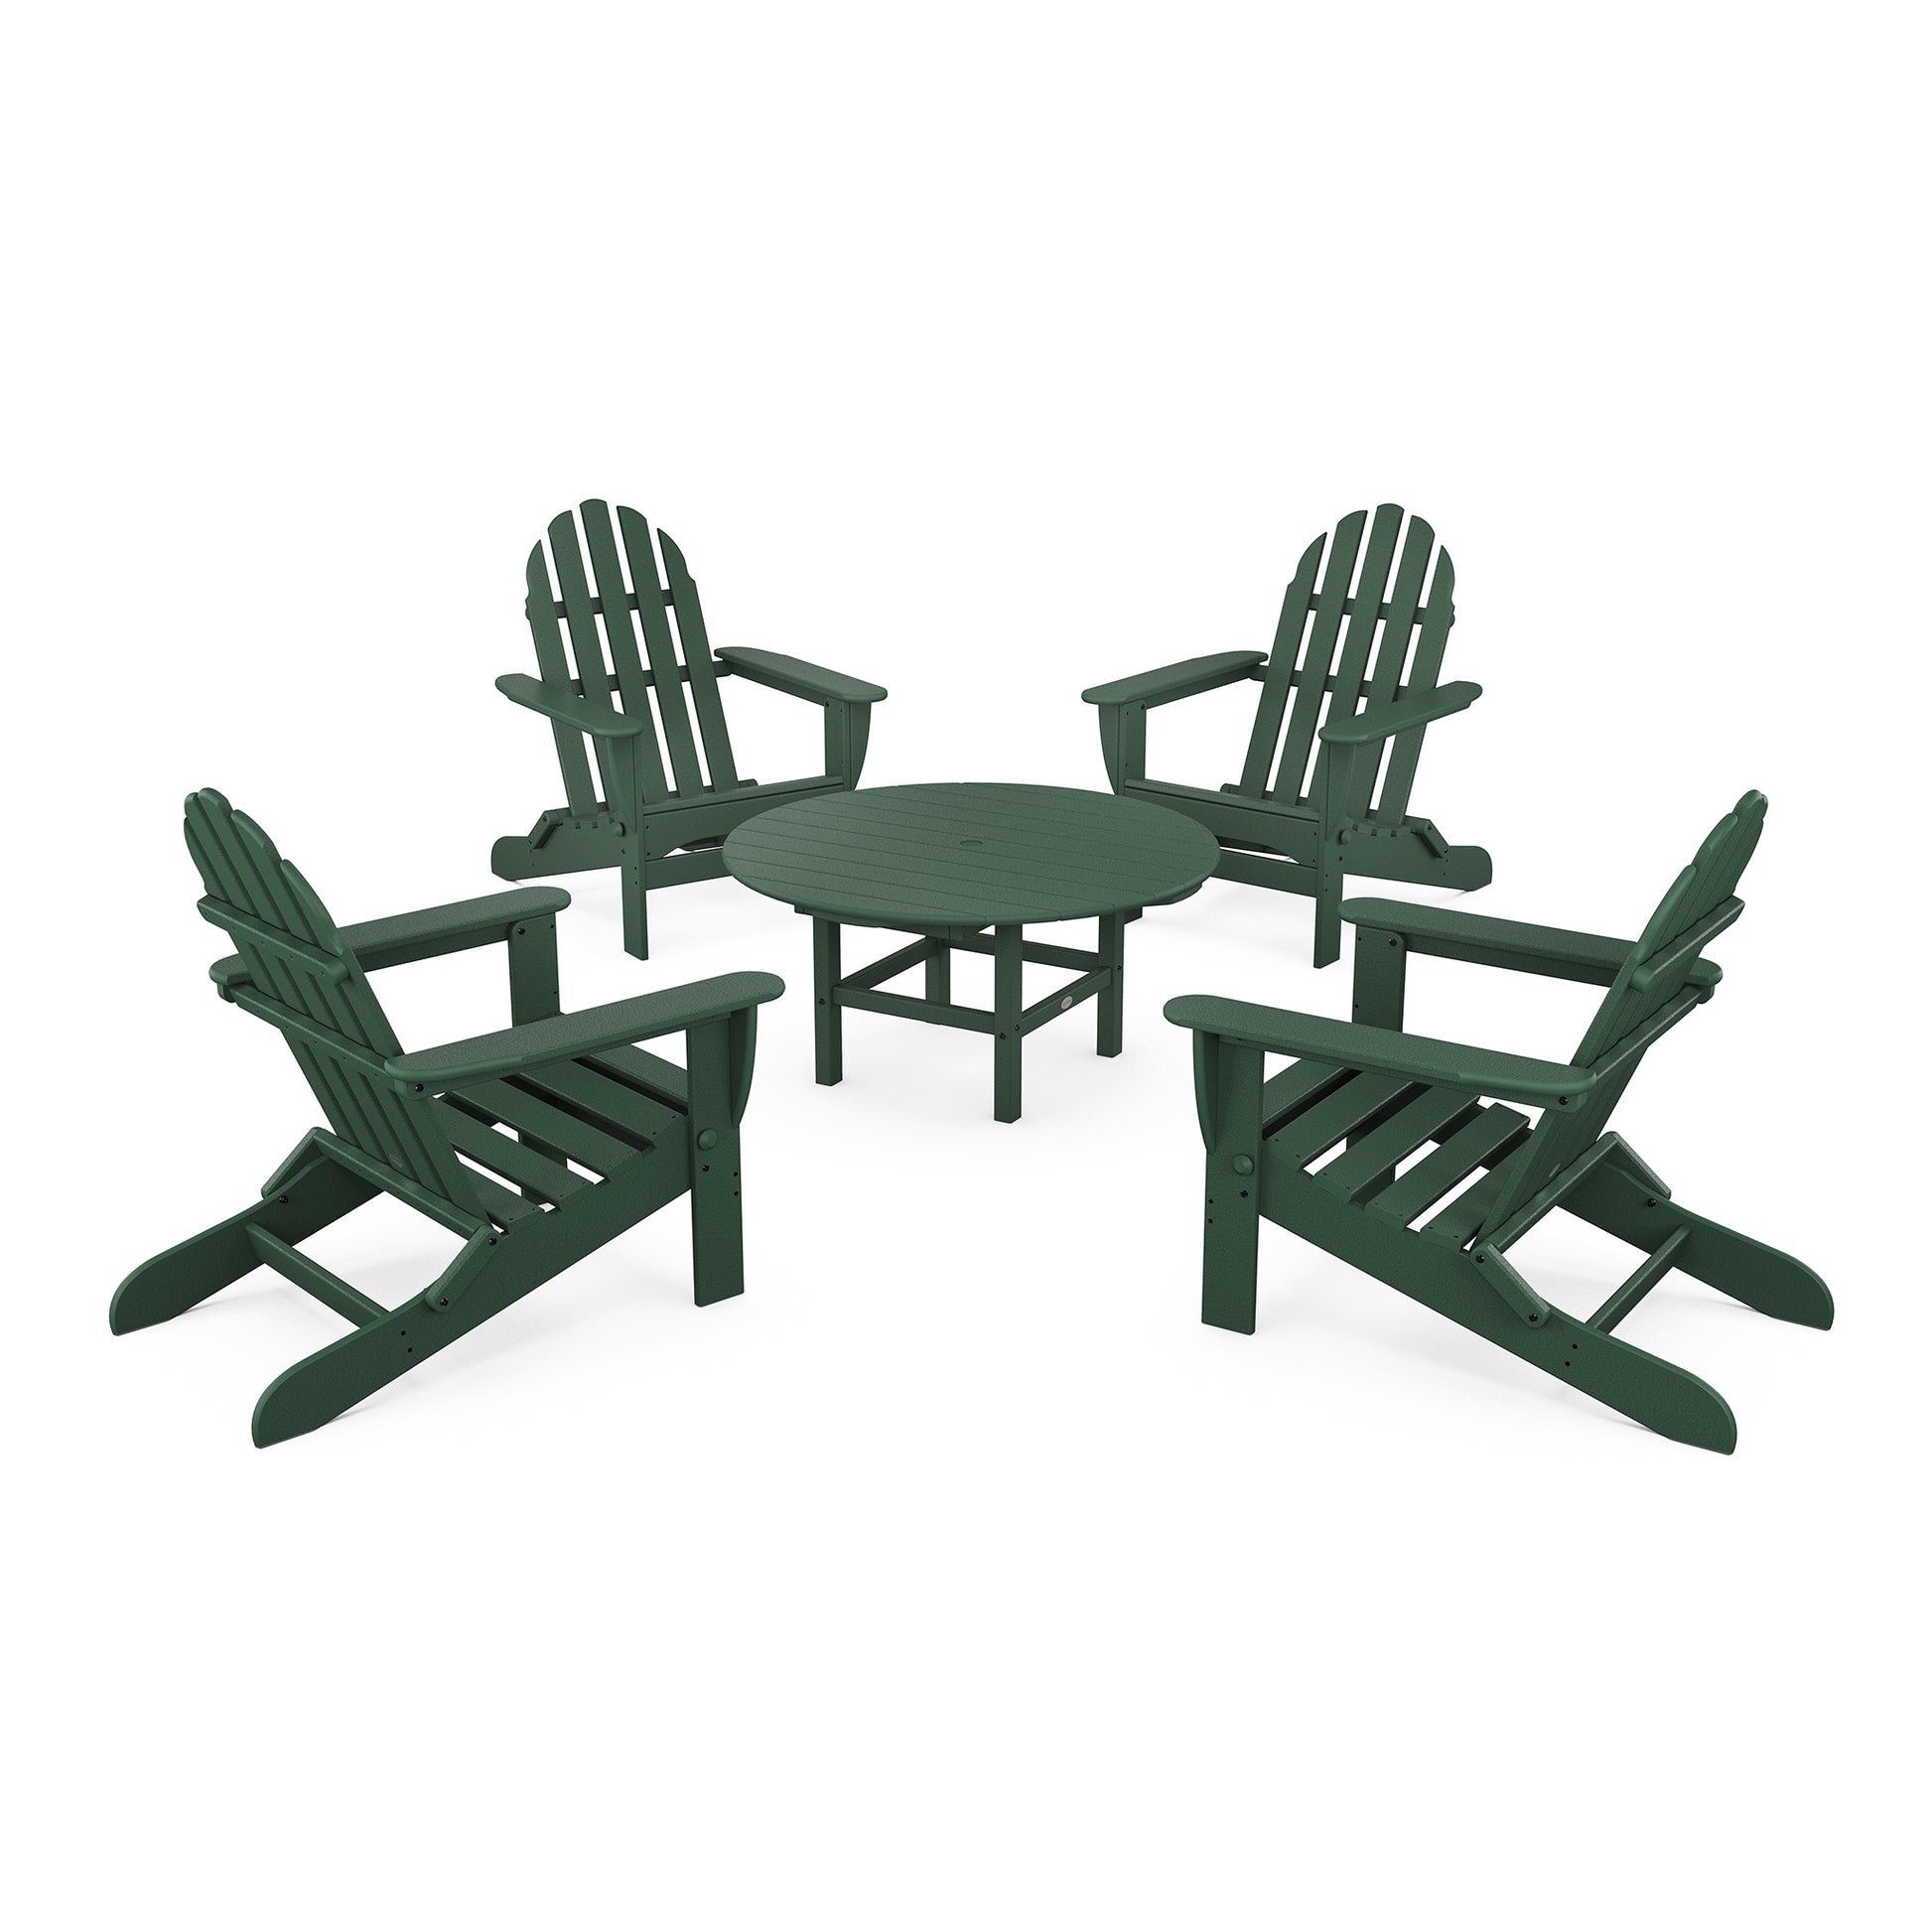 Four green POLYWOOD Classic Folding Adirondack chairs positioned around a matching circular table on a plain white background, depicting a casual outdoor conversation set.